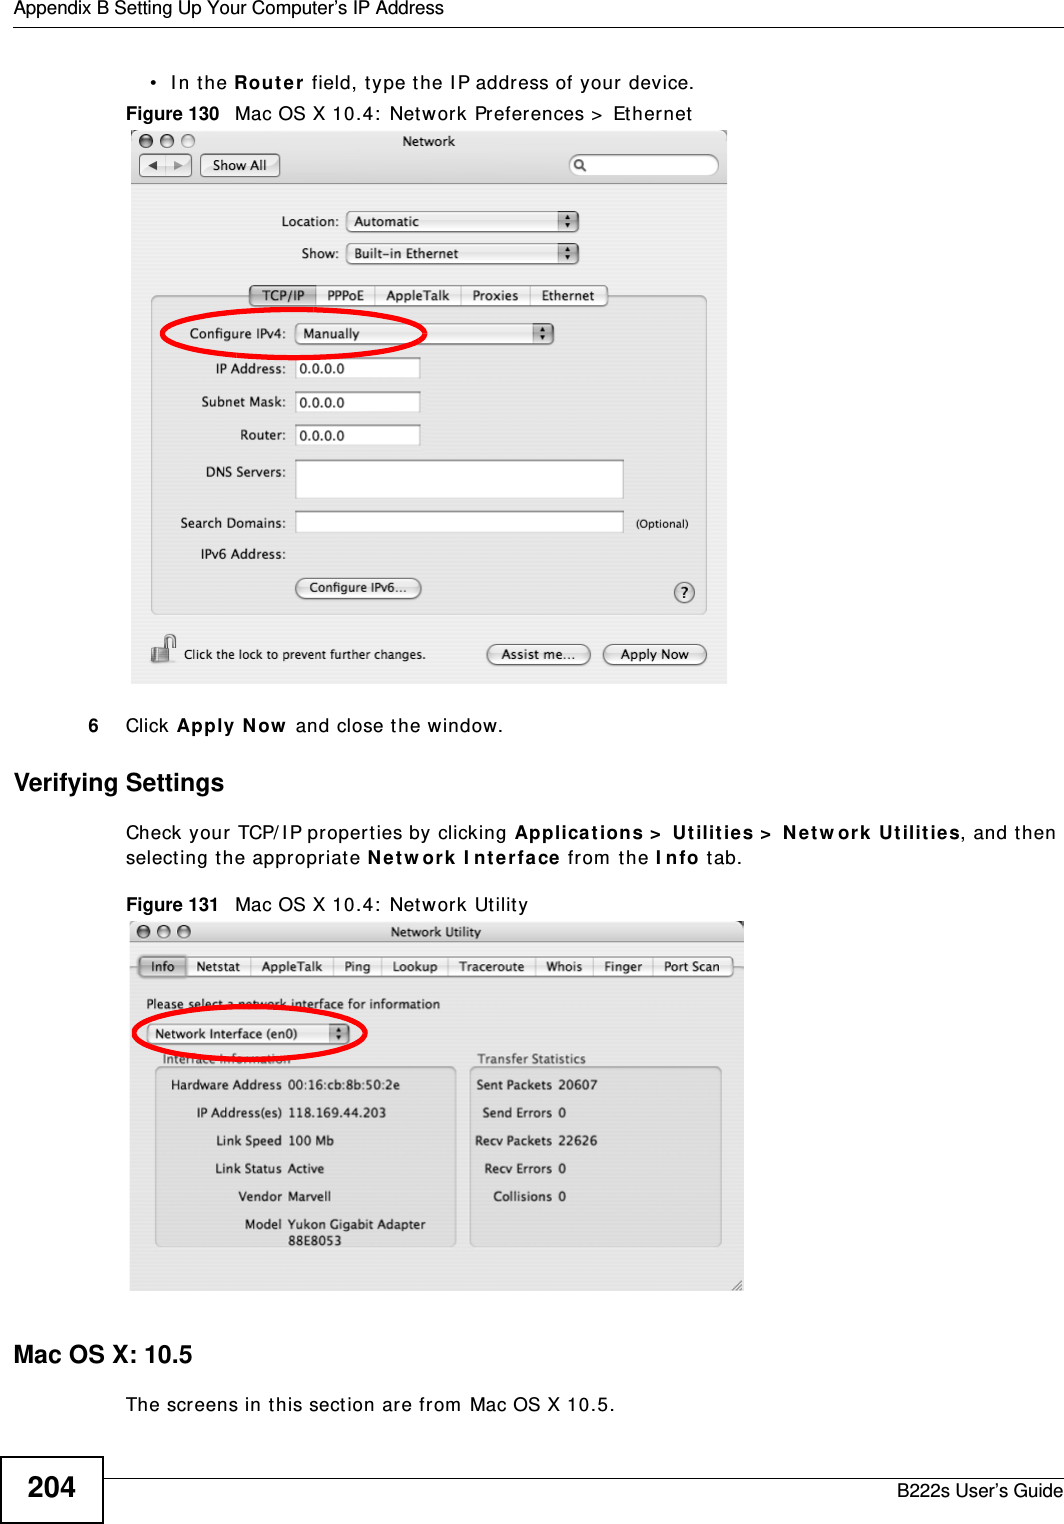 Appendix B Setting Up Your Computer’s IP AddressB222s User’s Guide204• In the Rou t e r field, type the I P address of your device.Figure 130   Mac OS X 10.4:  Network Preferences &gt;  Et hernet6Click Apply N ow  and close t he window.Verifying SettingsCheck your  TCP/ IP propert ies by clicking Applicat ions &gt;  Ut ilit ies &gt;  N e t w ork  Ut ilit ies, and t hen select ing t he appropriat e N et w or k I nt e rfa ce from  the I nfo tab.Figure 131   Mac OS X 10.4:  Network Ut ilit yMac OS X: 10.5The screens in t his section ar e from  Mac OS X 10.5.